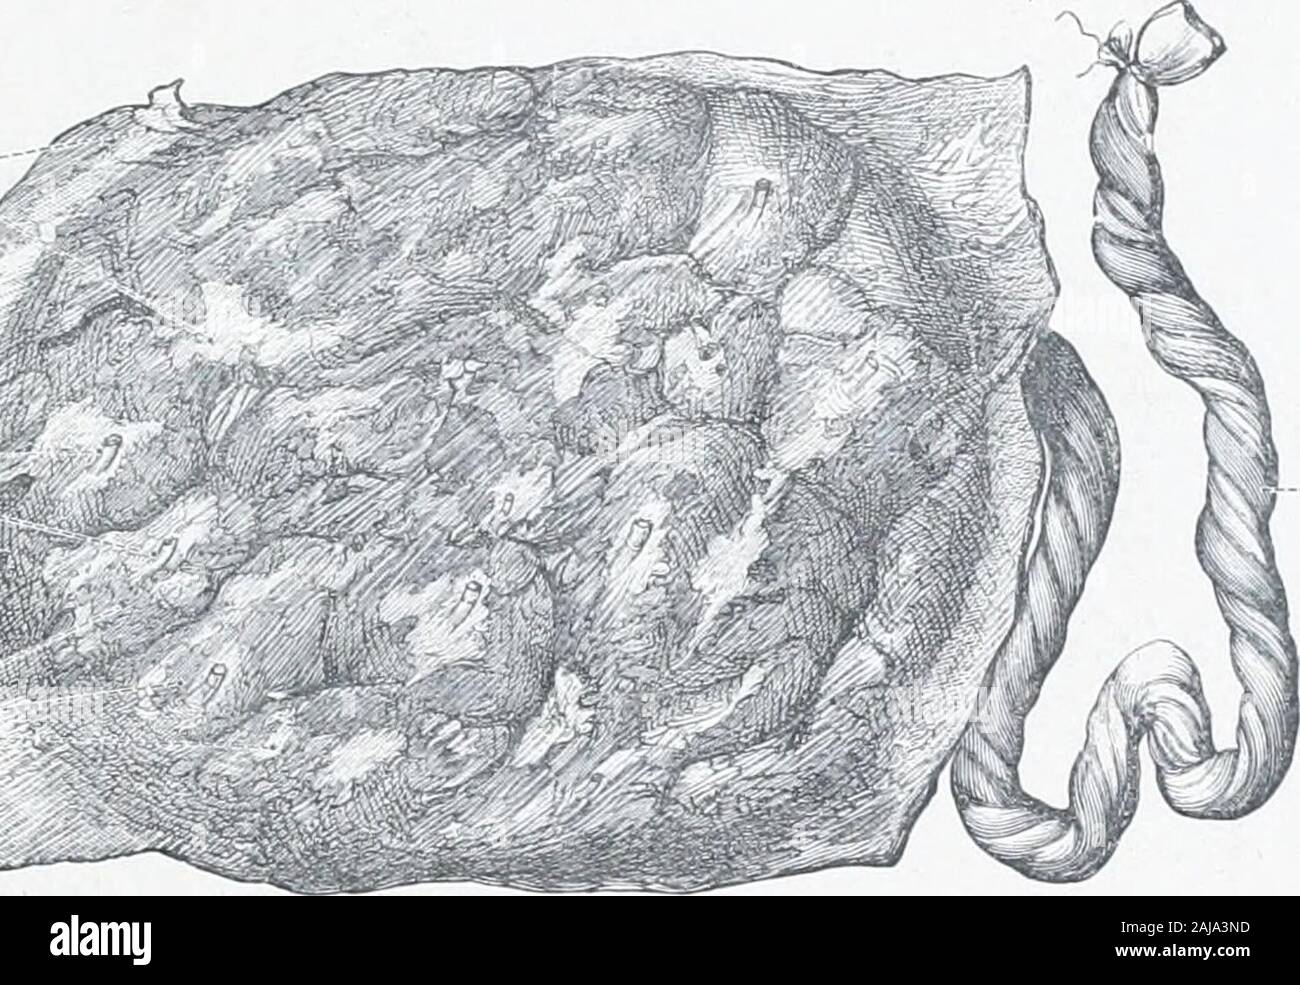 An atlas of human anatomy for students and physicians . Amnion (folded backover the placenta) Fig. 892.—Internal or Fcetal Surface of the Placenta m: Full Tlrm. The umbilical vessels have been injected. Decidua serotina Membrana decidua (basalis)- Tom uterine (utero-placental) veins Cotyledons, lobes, or loculi of the placenta Lobi placental. Umbilical cord -Funiculus umbilicalis Fig. 893.—External, M.vternal, or Uterine Surface of the Placenta at Full Term, with the Umbilical Cord (Funiculus Umbilicalis). Branches of the umbilicalartery in cross-section Opening of a uterine (uteroplacental)ar Stock Photo